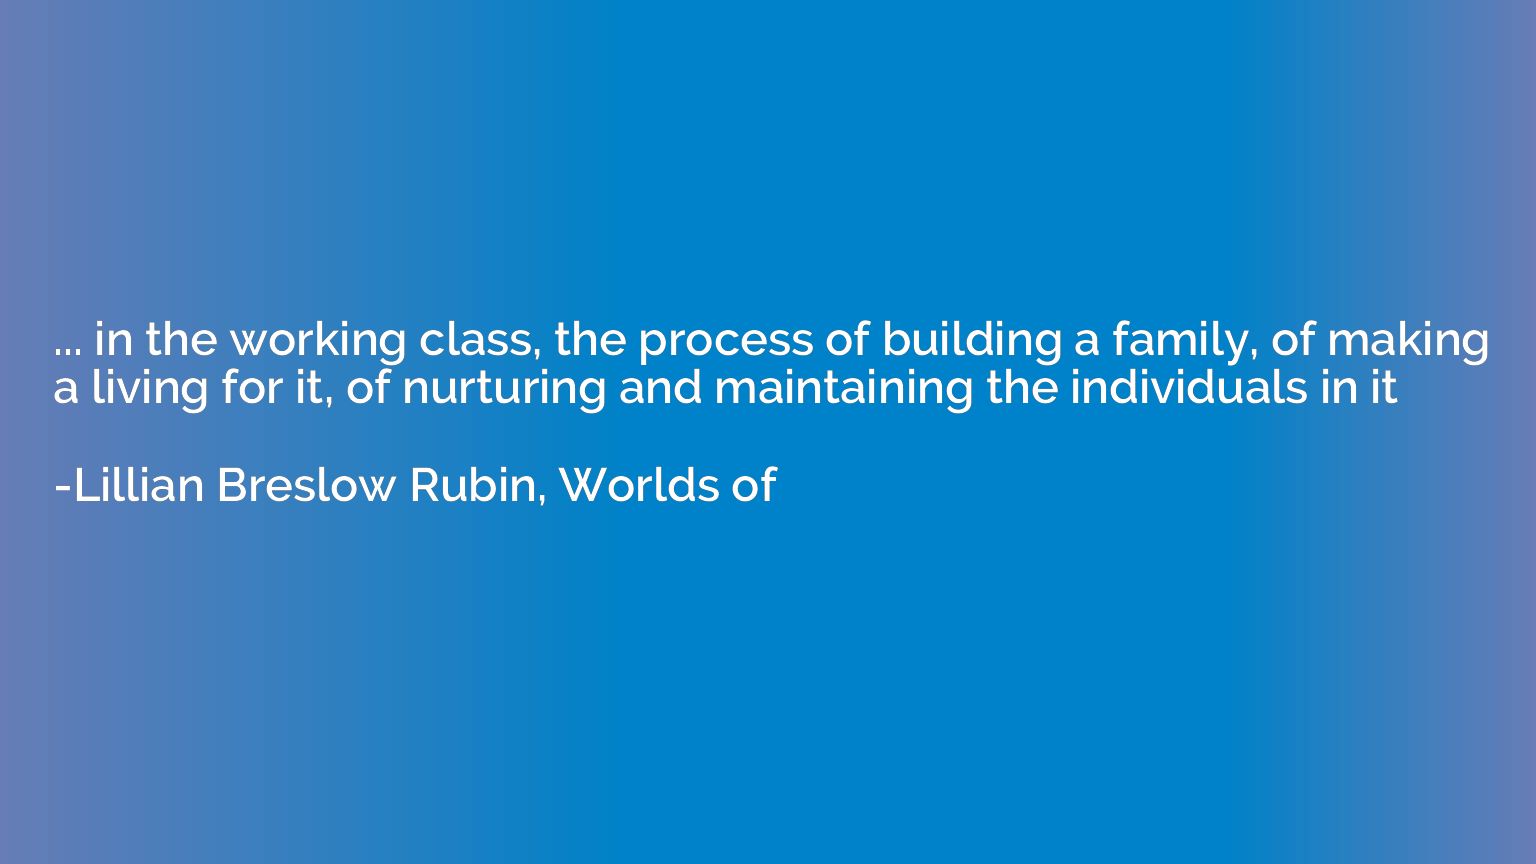 ... in the working class, the process of building a family, 